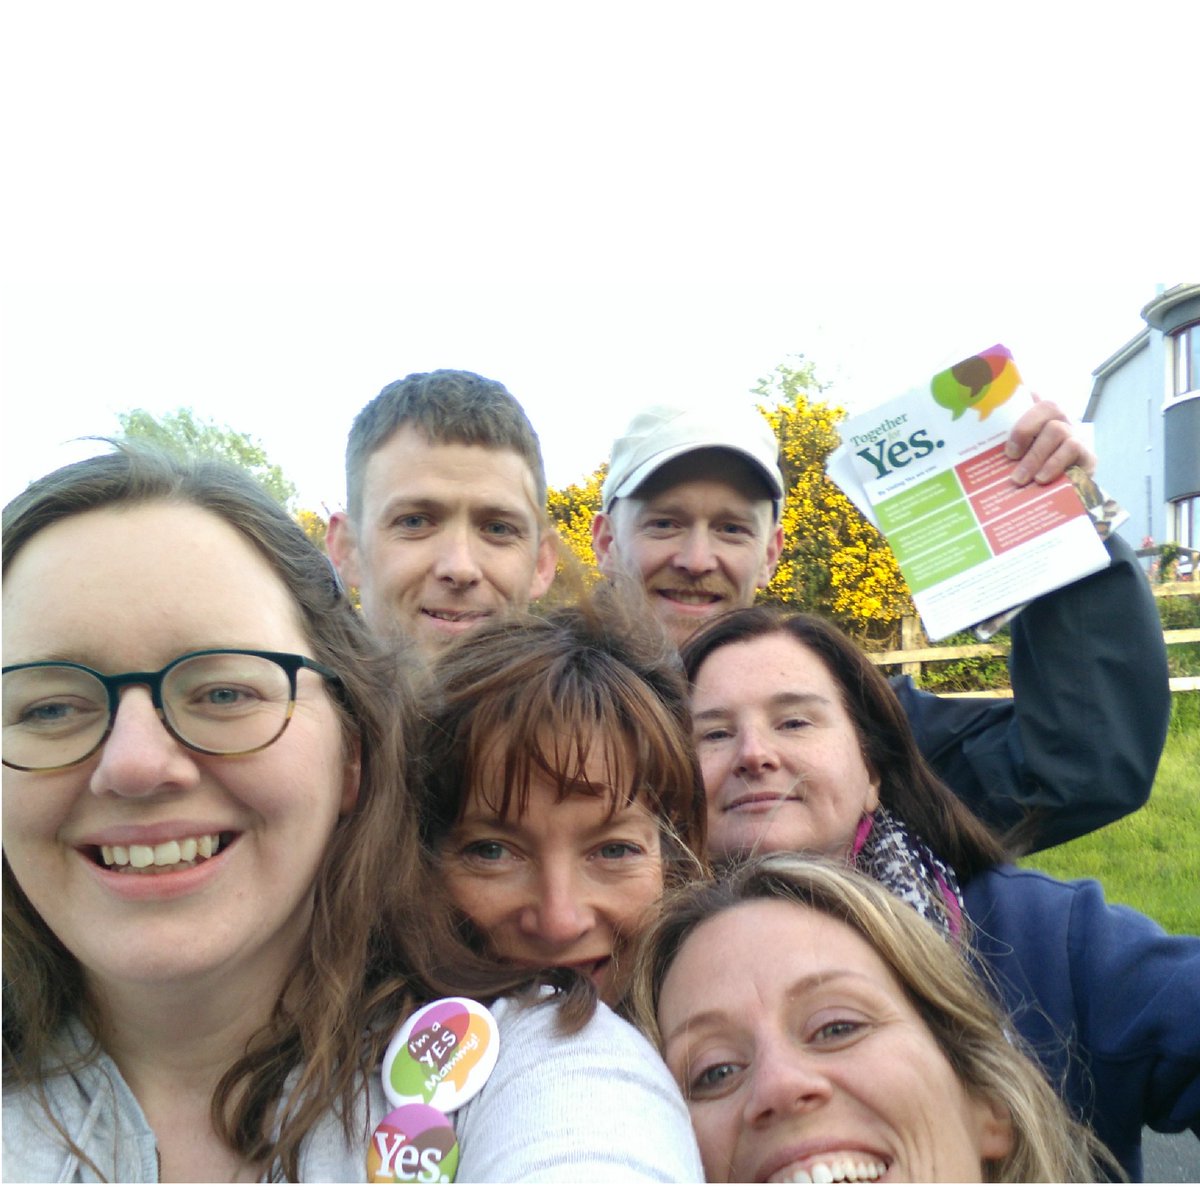 There was a crack-commando canvassing team from Ballina-Killaloe across to Nenagh. Shout out to @cathpow @DavidAh99173523 @tippgreensrose, Anne-Marie K,  @CNaugh2, Cathal, Fiona Bonfield & all the  #TippRepealers we've missed 